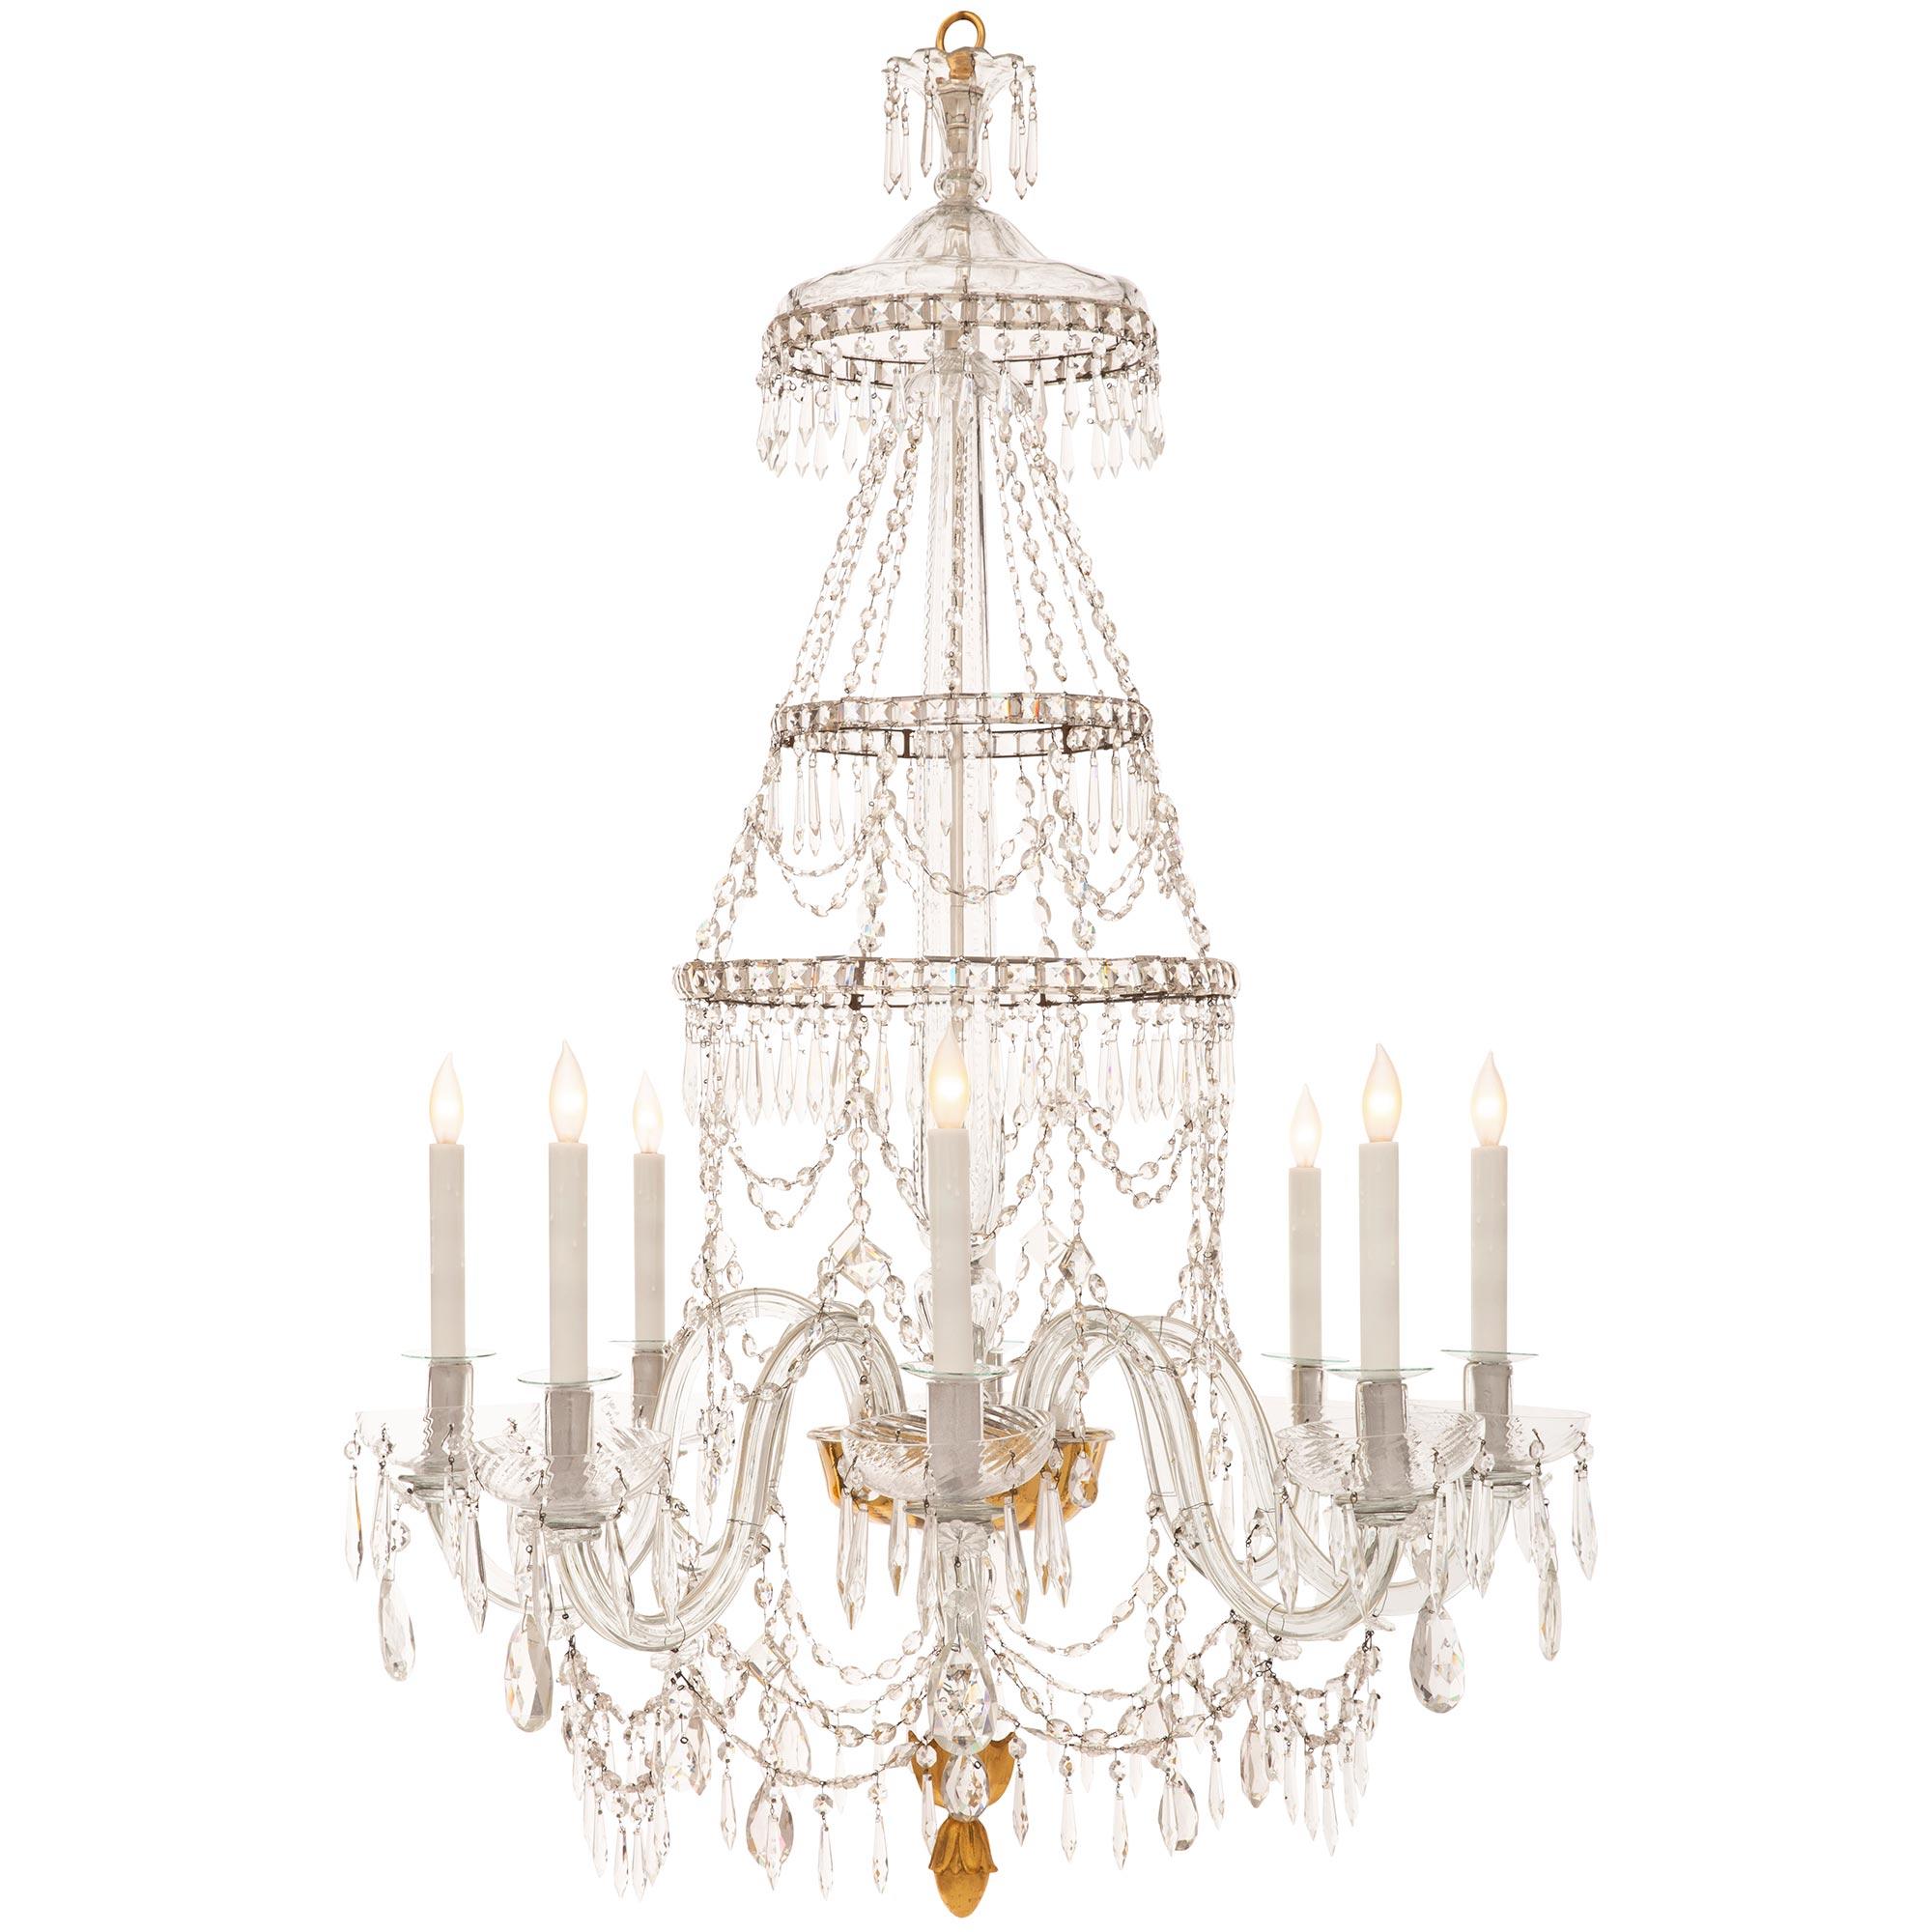 Italian 18th Century Venetian St. Murano Glass and Giltwood Chandelier In Good Condition For Sale In West Palm Beach, FL